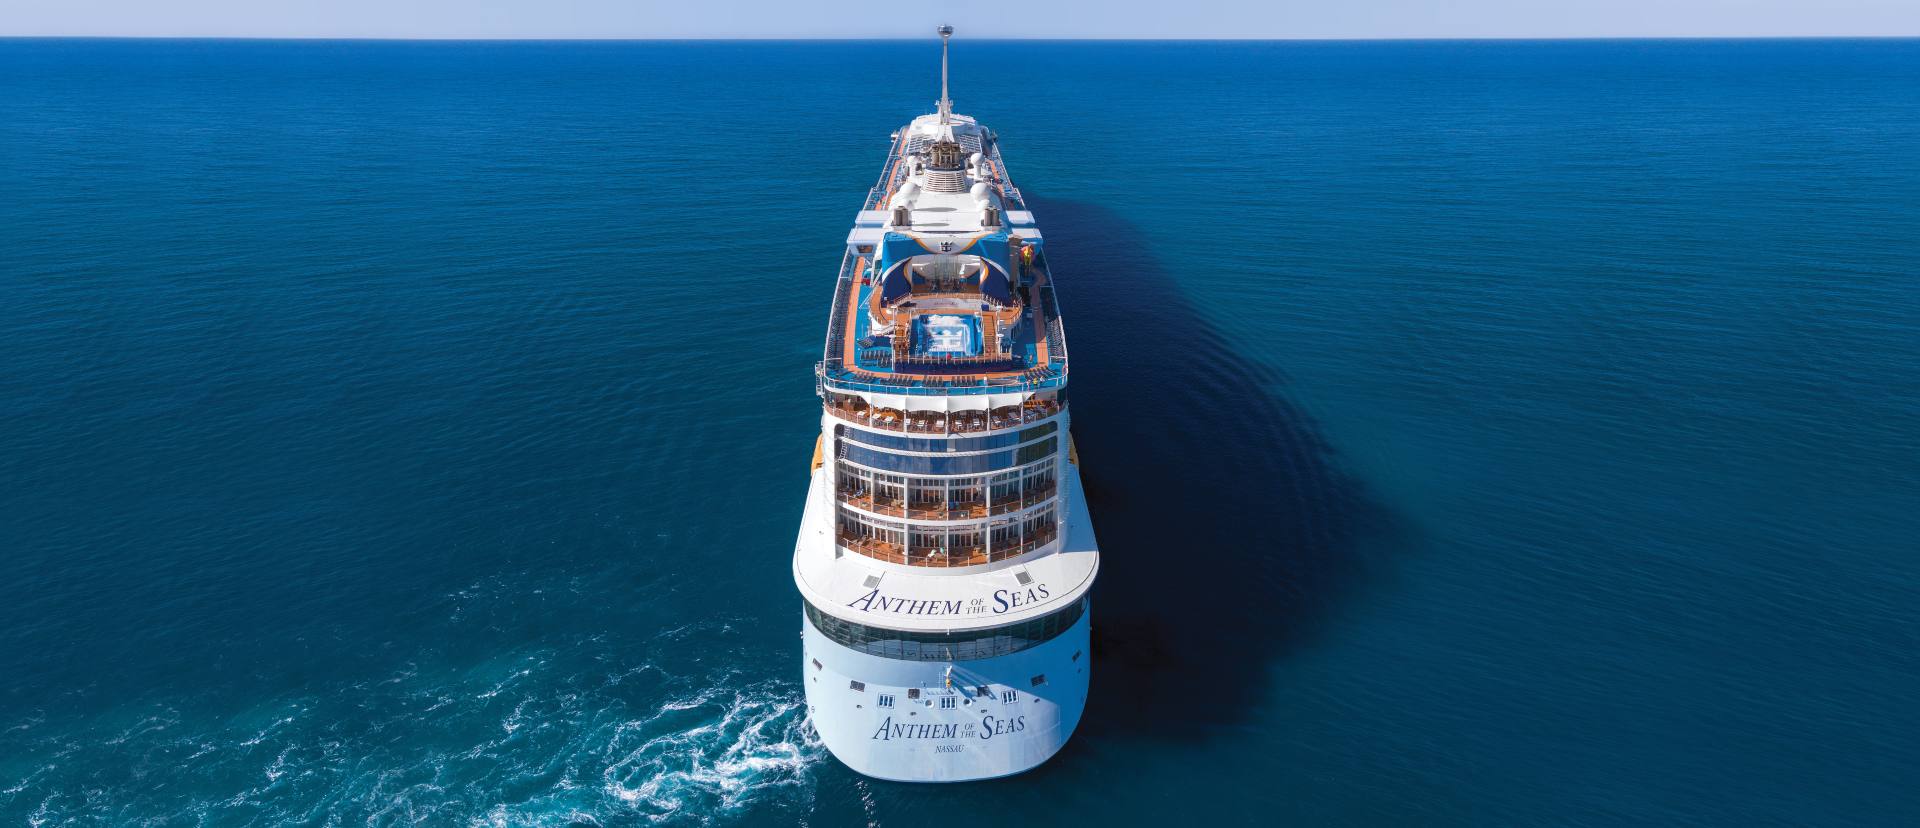 Anthem of the Seas<br> Return To Sea<br><br>What to Expect on a Cruise During Covid-19